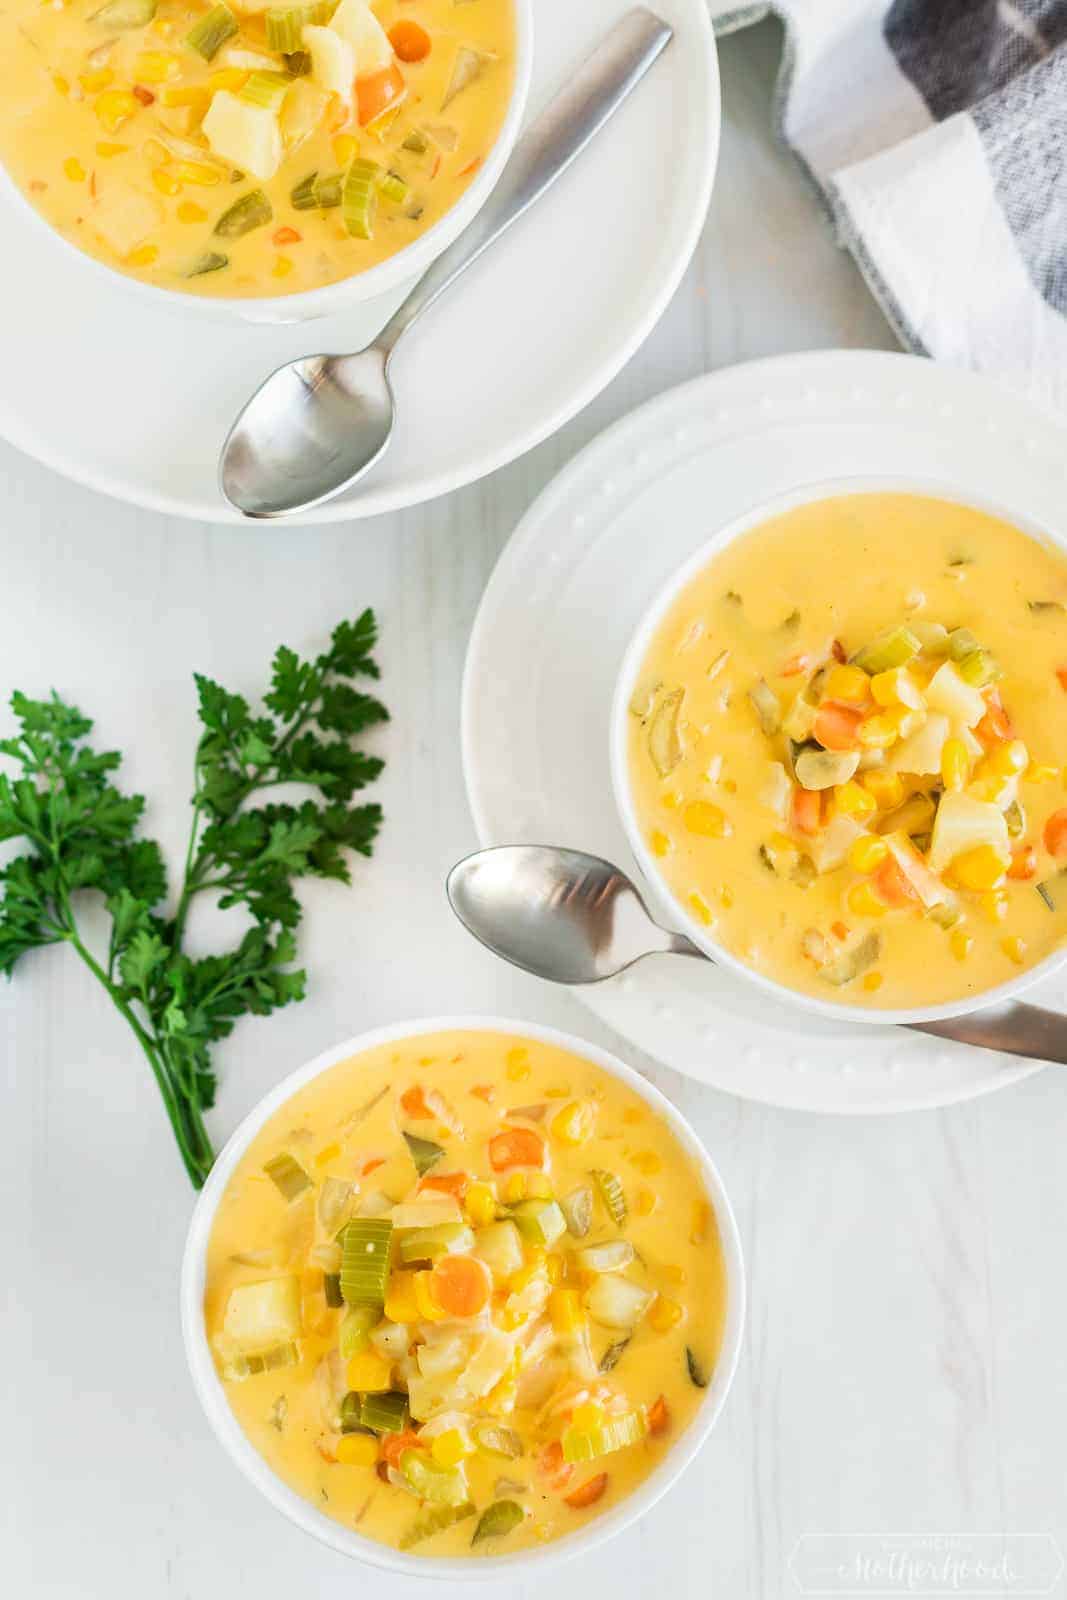 three bowls of delicious corn chowder with a sprig of parsley